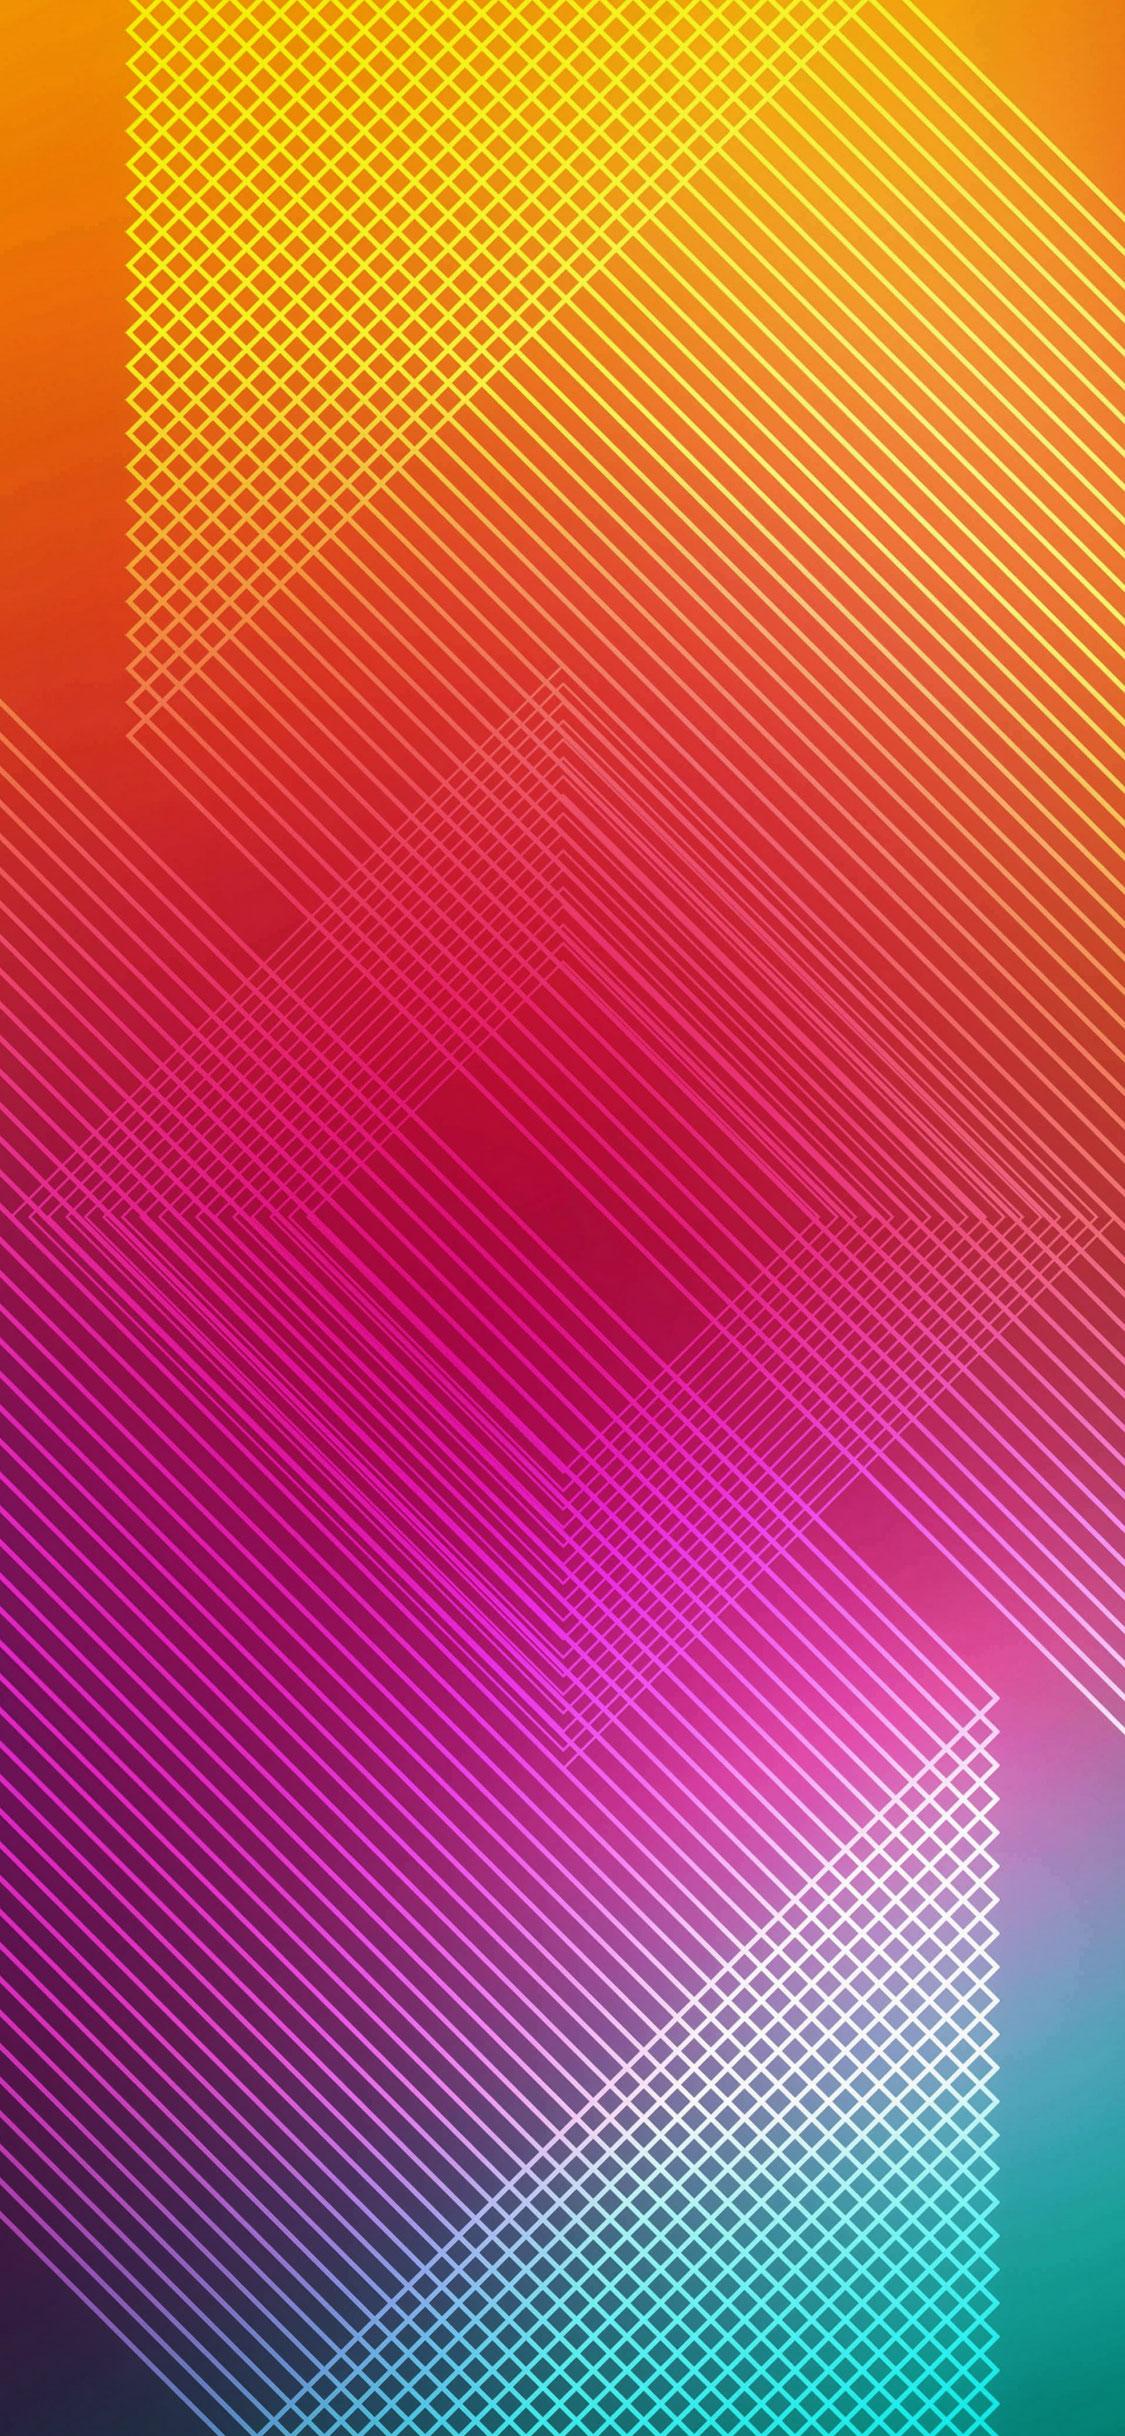 colourful wallpapers hd 4k (18)